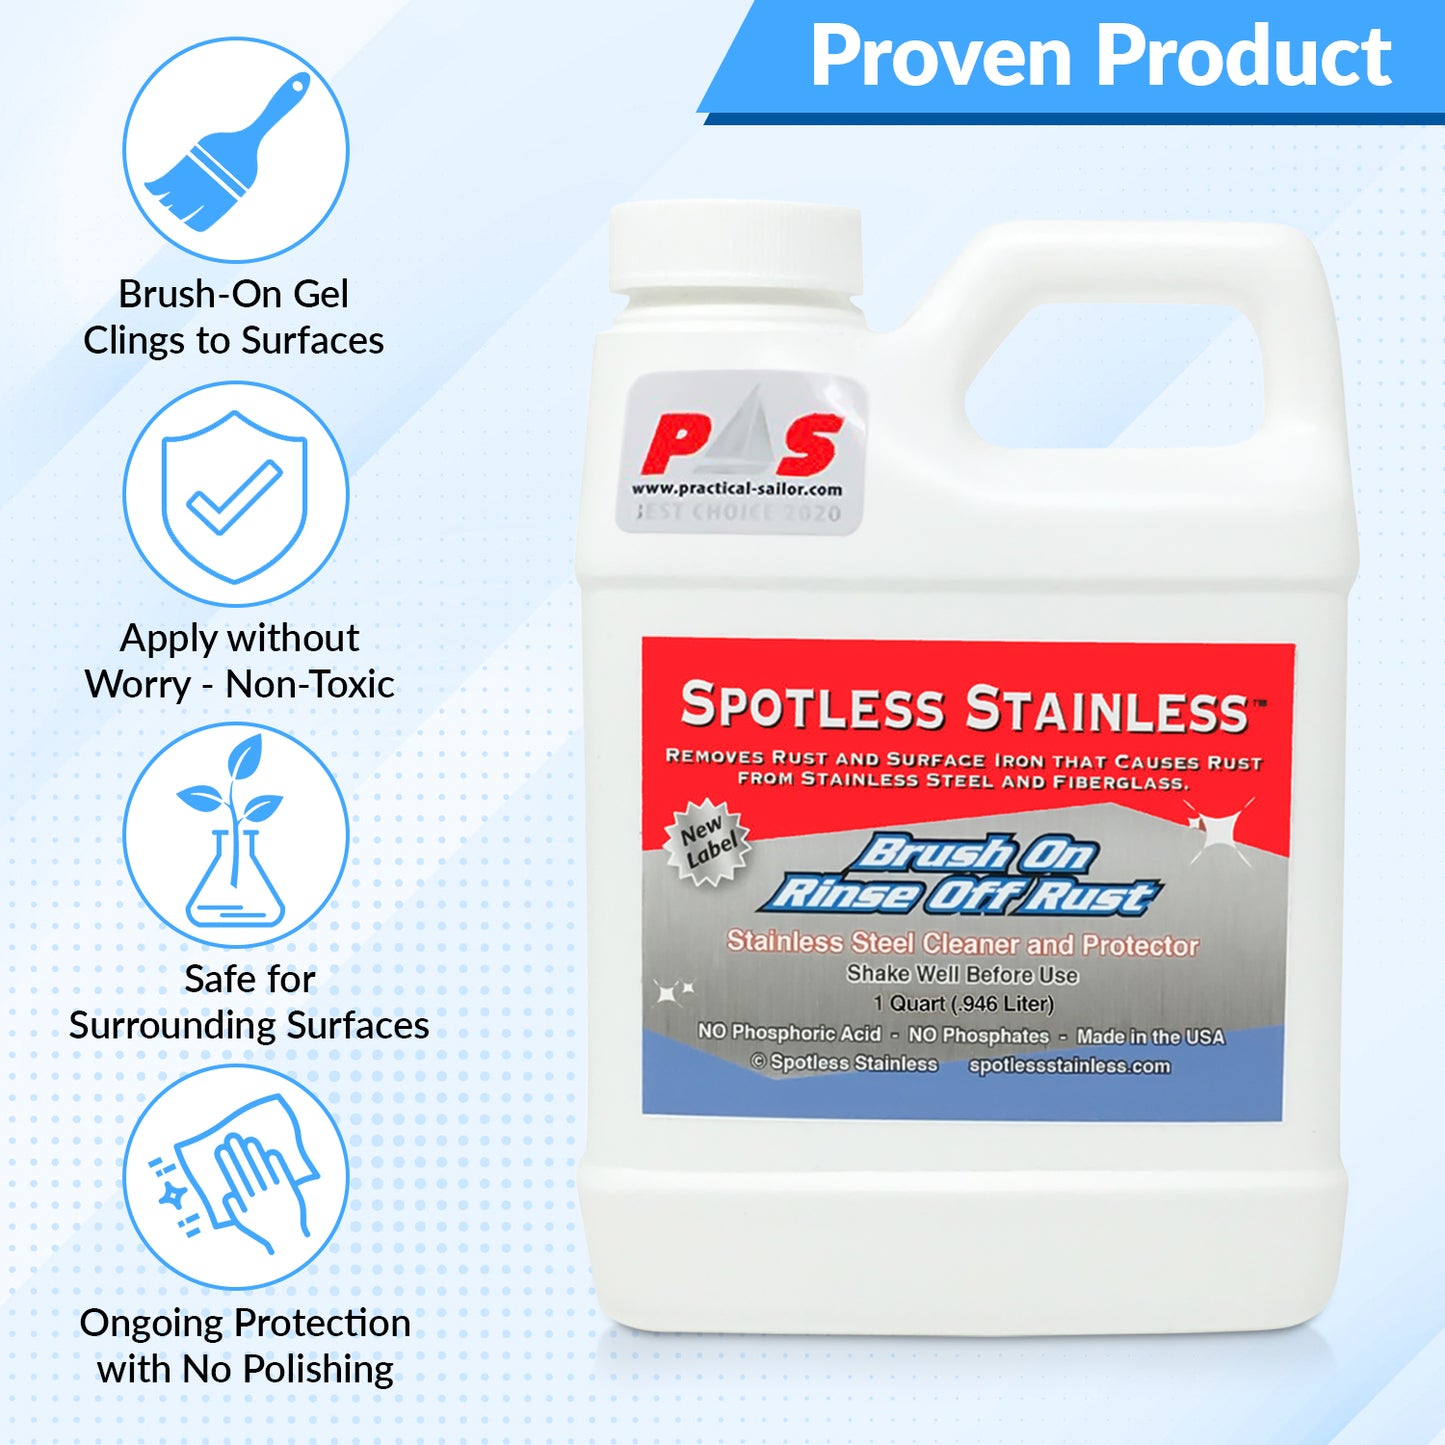 Spotless Stainless Marine Rust Remover and Protectant - 16 Ounce (Pint)